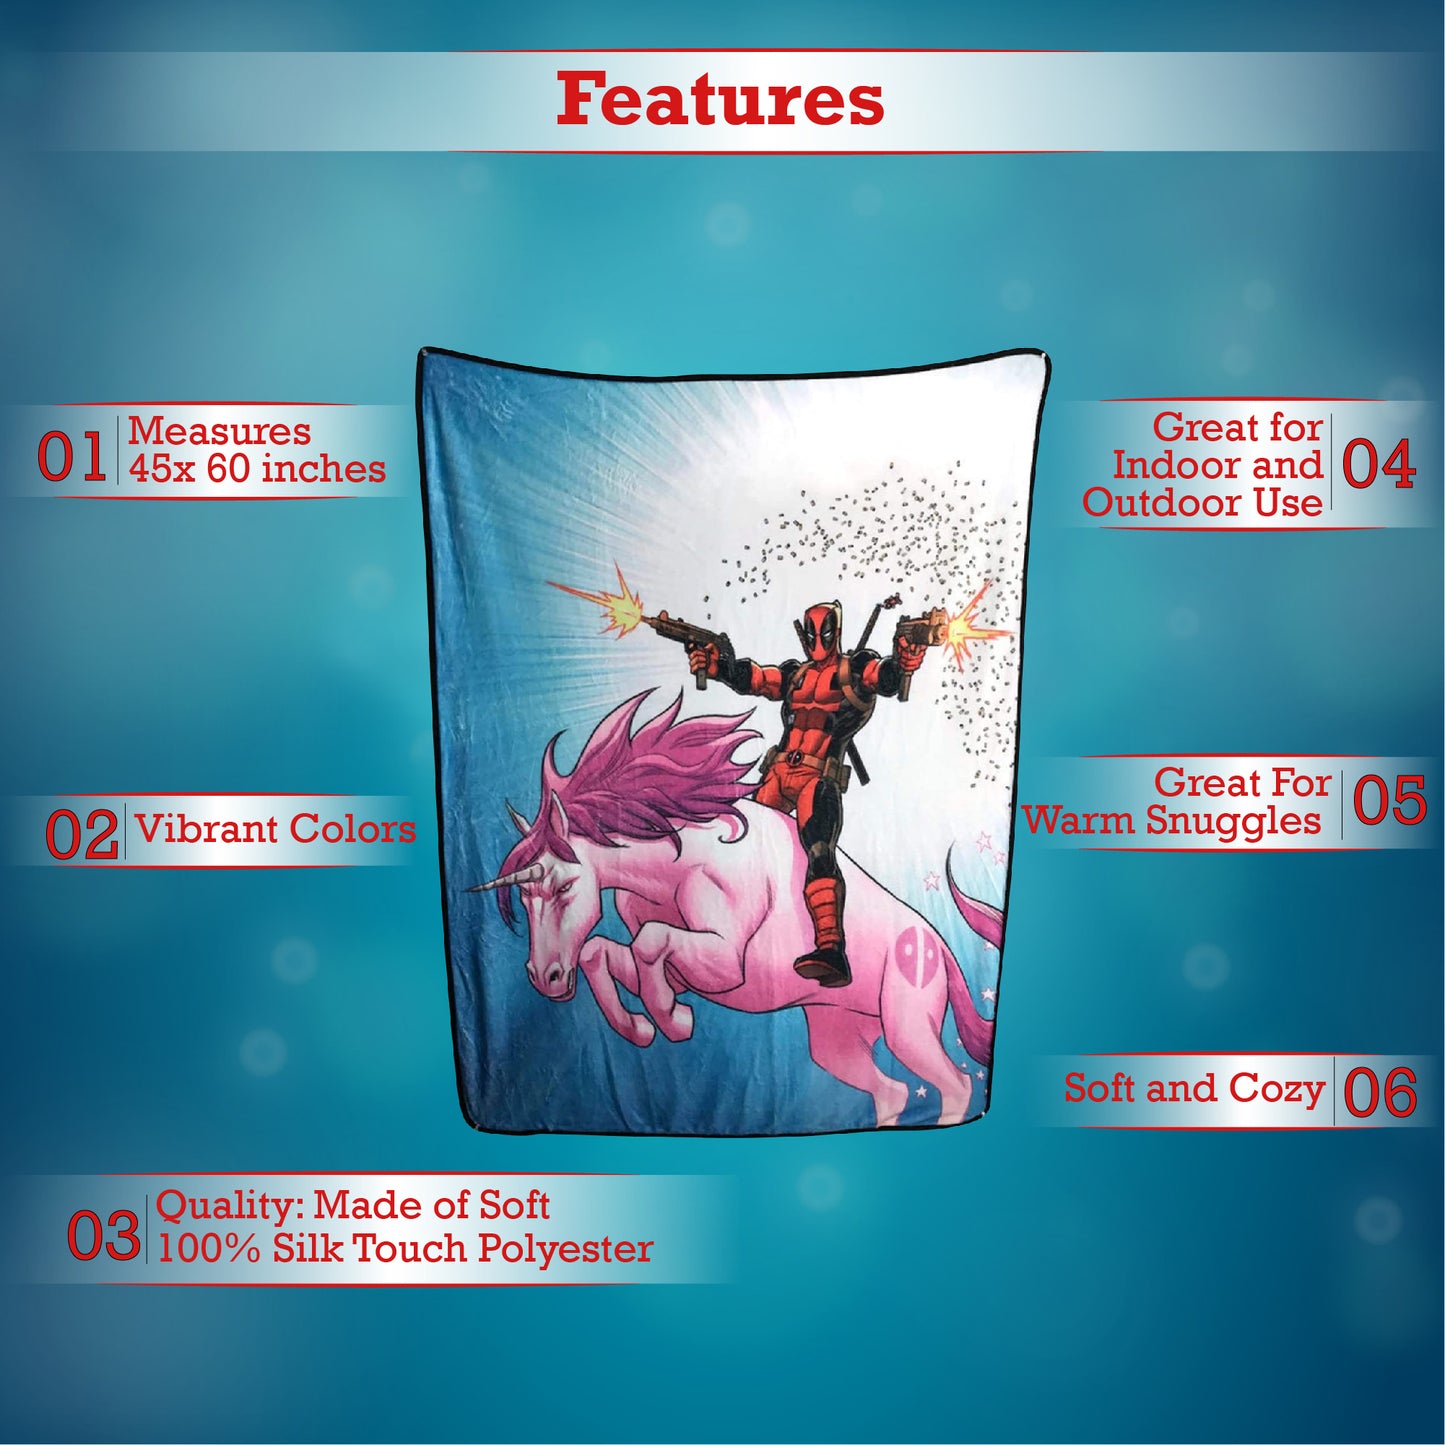 Marvel Deadpool Unicorn Fleece Softest Comfy Throw Blanket for Adults & Kids| Measures 60 x 45 Inches